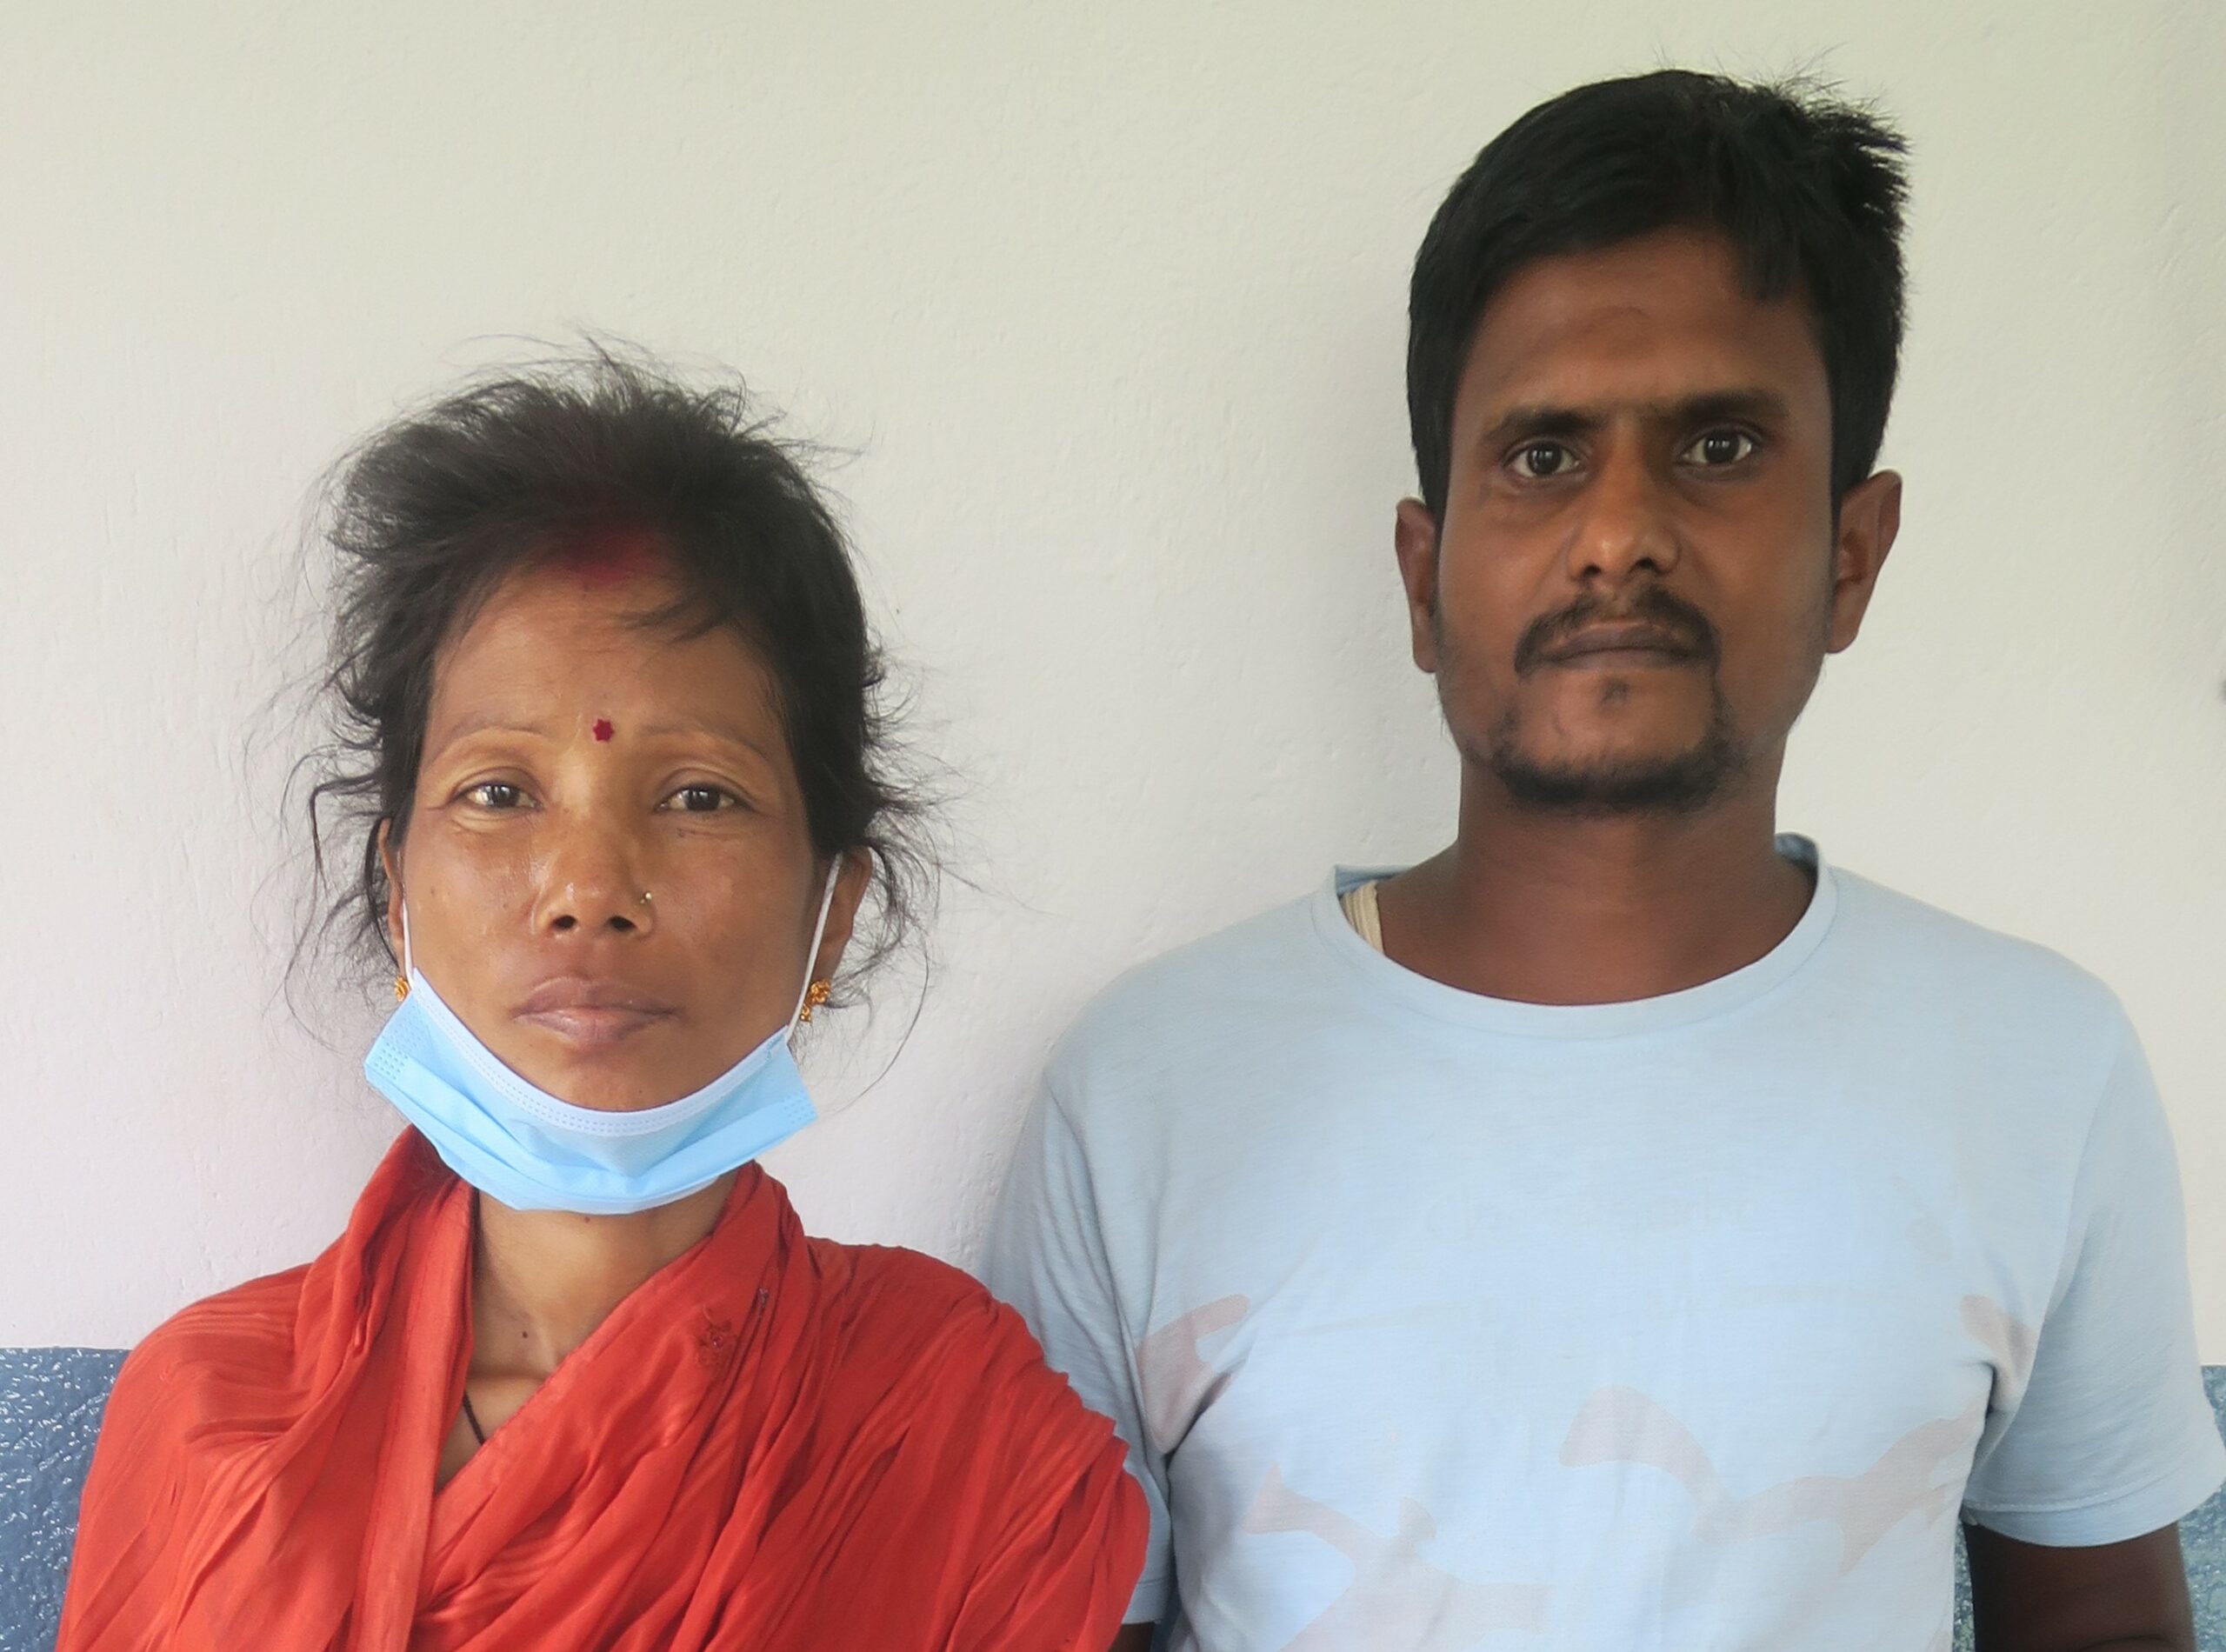 a Nepali couple in their 30s gaze calmly at the camera, looking tired. the woman is quite thin and wears an orange wrap. the man wears a plain white t-shirt.